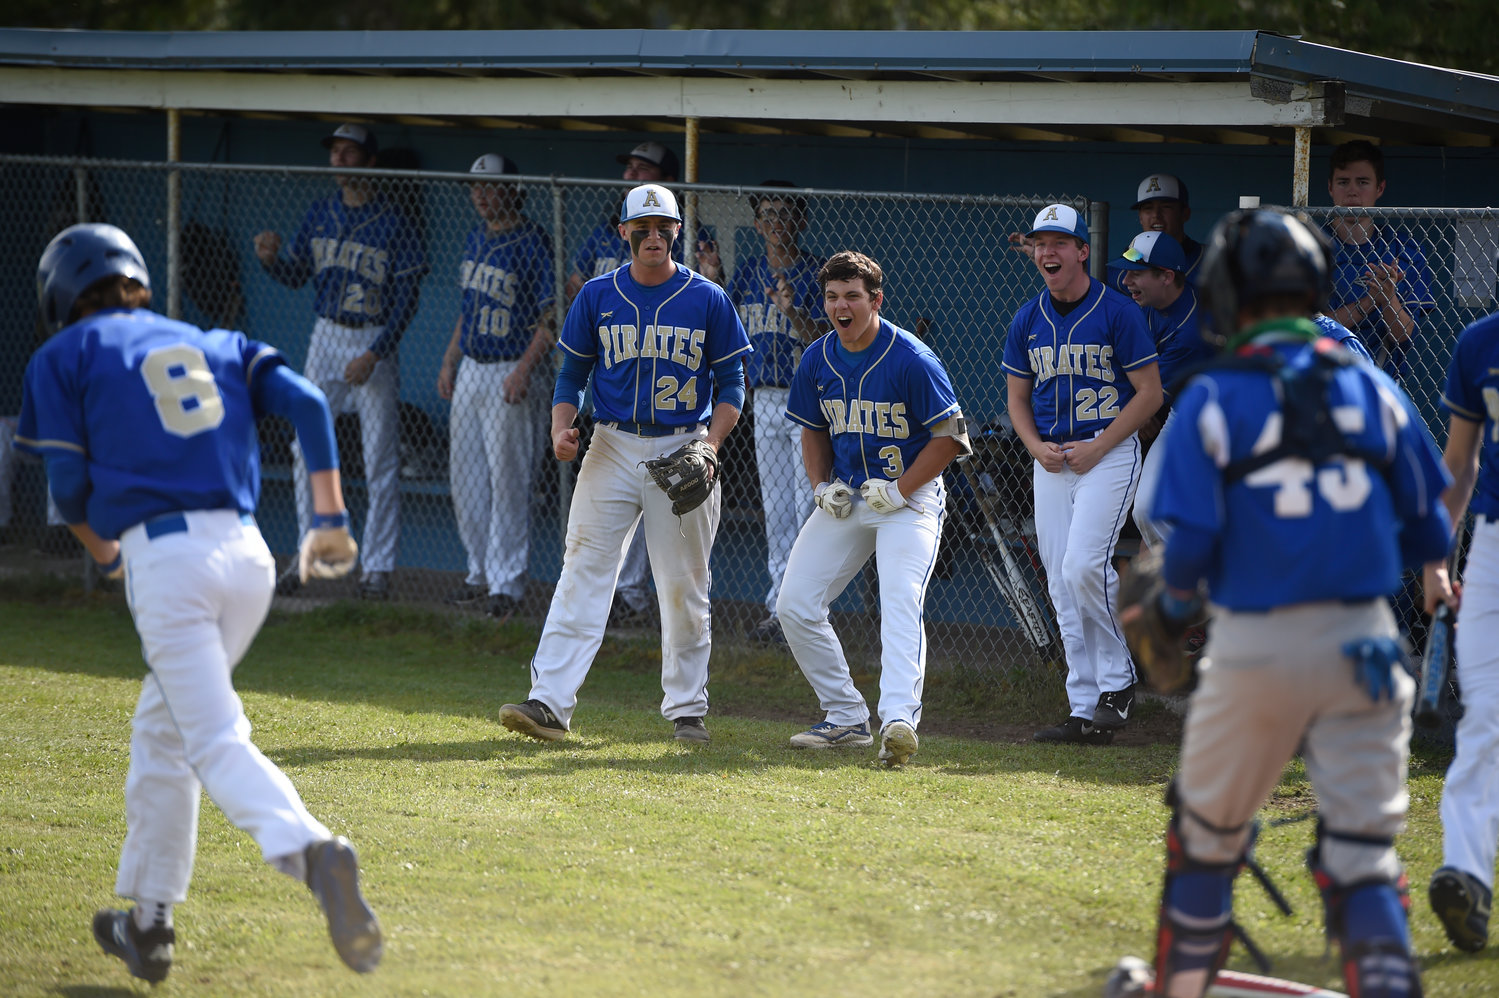 Adna players celebrate after scoring on Toutle Lake in the district semifinals on Thursday.